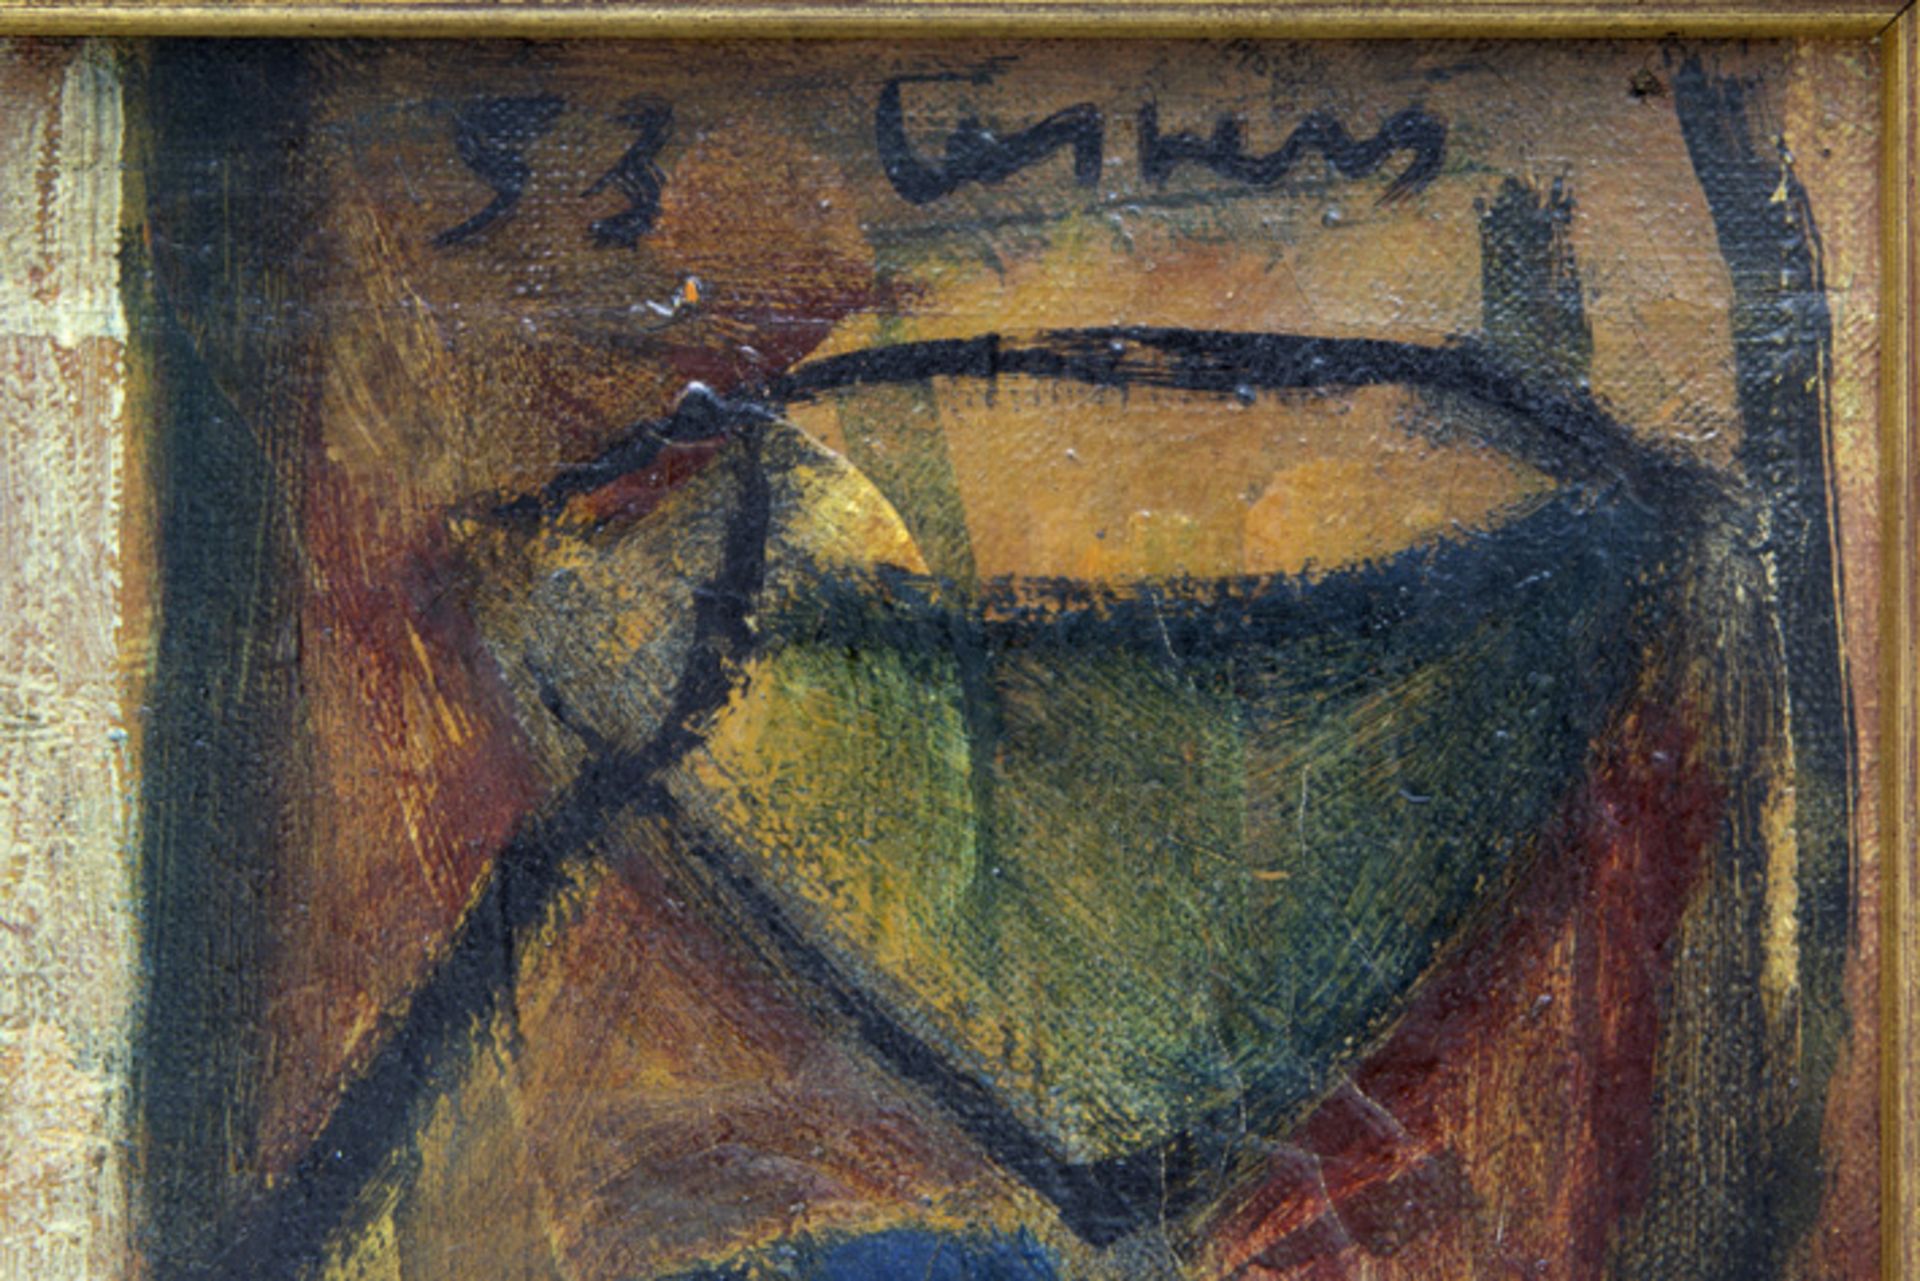 mid 20th Cent. Belgian typical Floris Jespers "African period" oil on canvas - signed and dated 1953 - Image 2 of 4